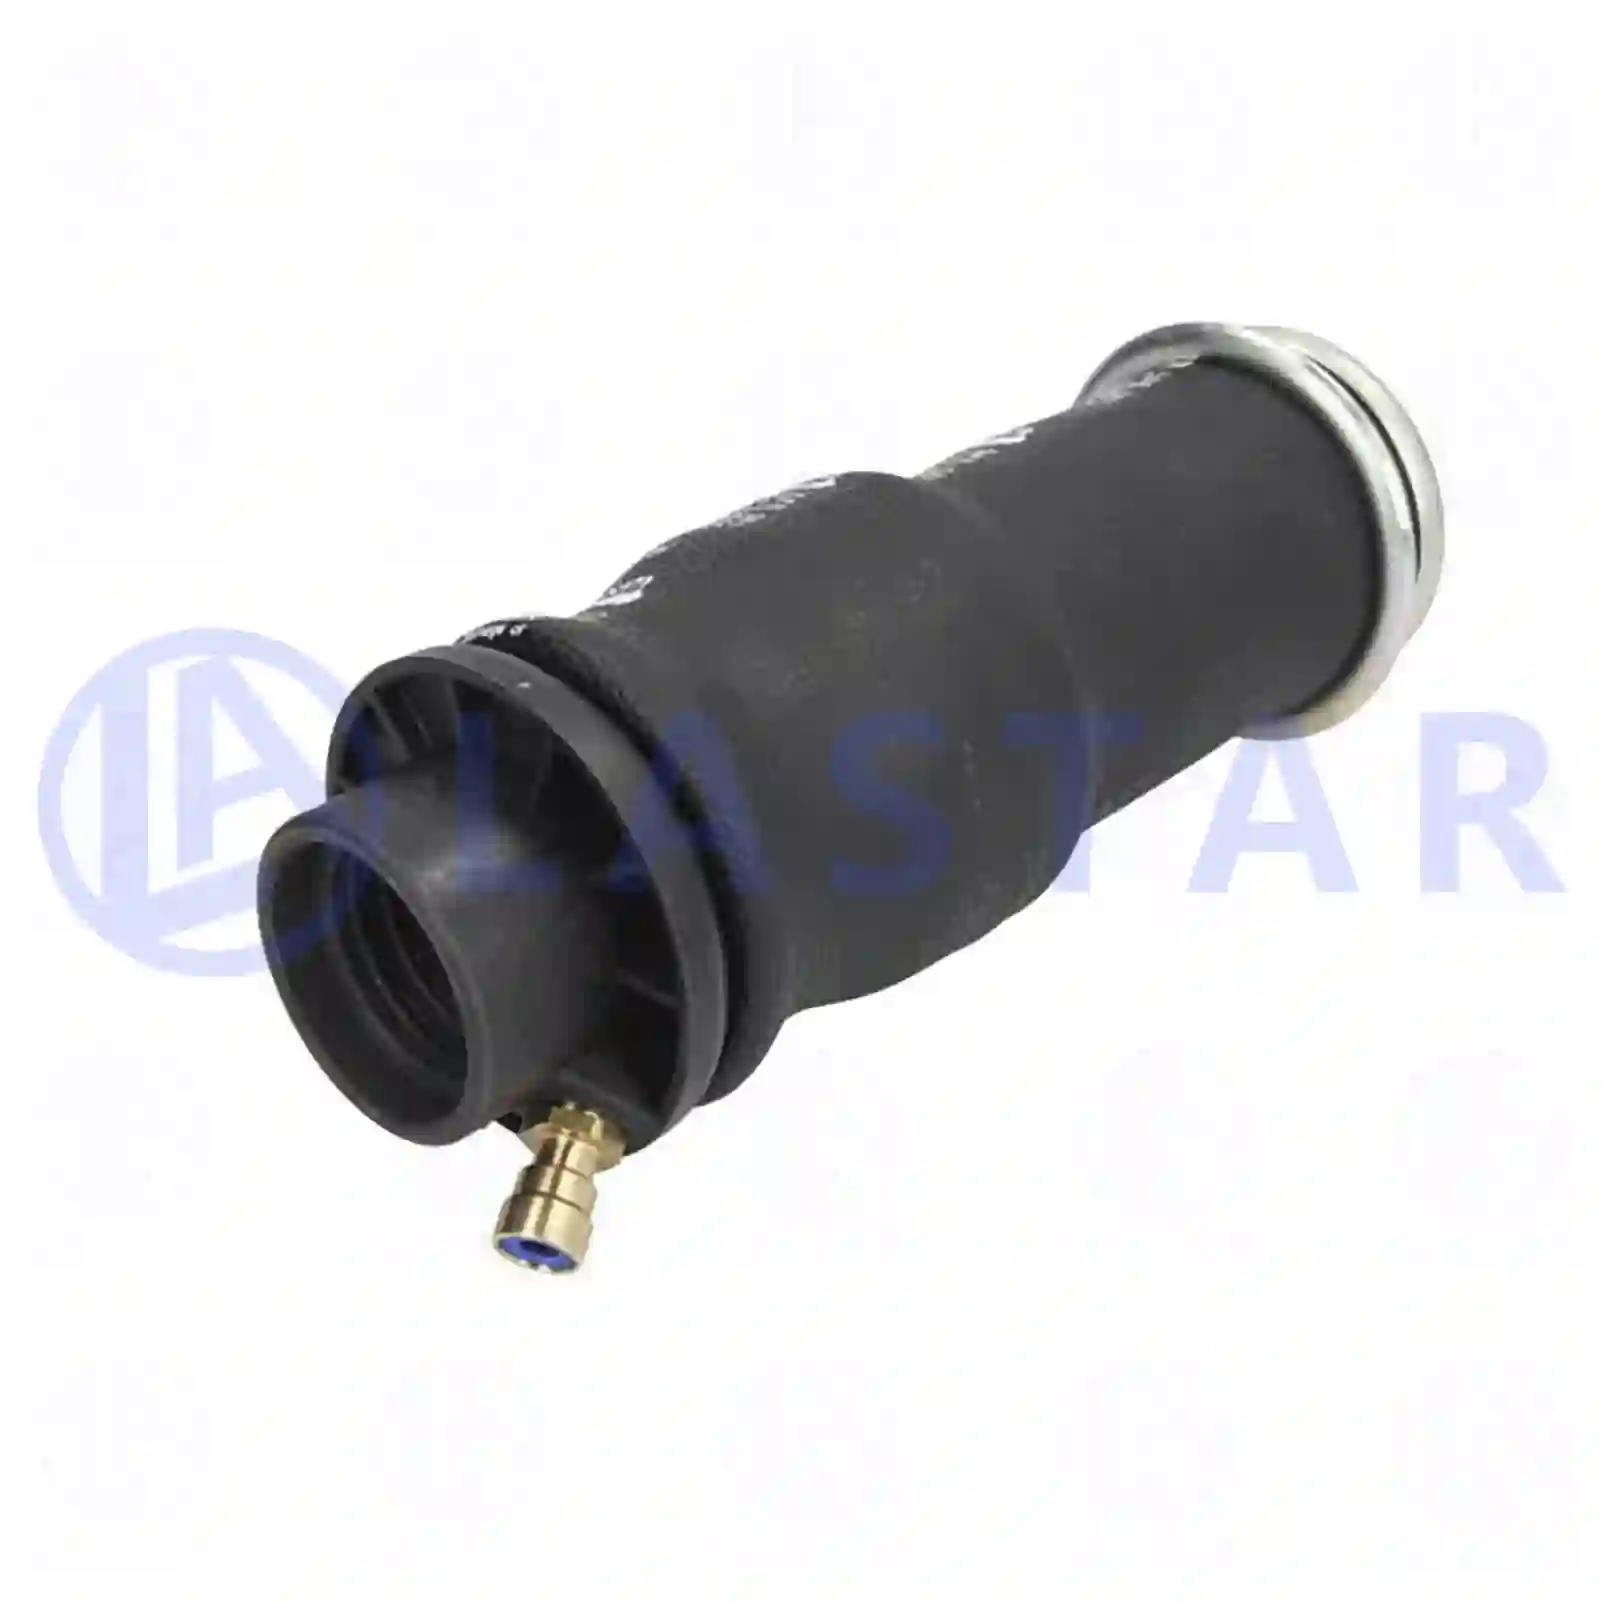 Air bellow, cabin shock absorber, 77735321, 1381903, 1381905, 1381919, 1397393, 1397395, 1397397, 1397399, 1432081, 1432082, 1432083, 1432084, 1435852, 1435853, 1476415, 2086674, ZG40692-0008 ||  77735321 Lastar Spare Part | Truck Spare Parts, Auotomotive Spare Parts Air bellow, cabin shock absorber, 77735321, 1381903, 1381905, 1381919, 1397393, 1397395, 1397397, 1397399, 1432081, 1432082, 1432083, 1432084, 1435852, 1435853, 1476415, 2086674, ZG40692-0008 ||  77735321 Lastar Spare Part | Truck Spare Parts, Auotomotive Spare Parts